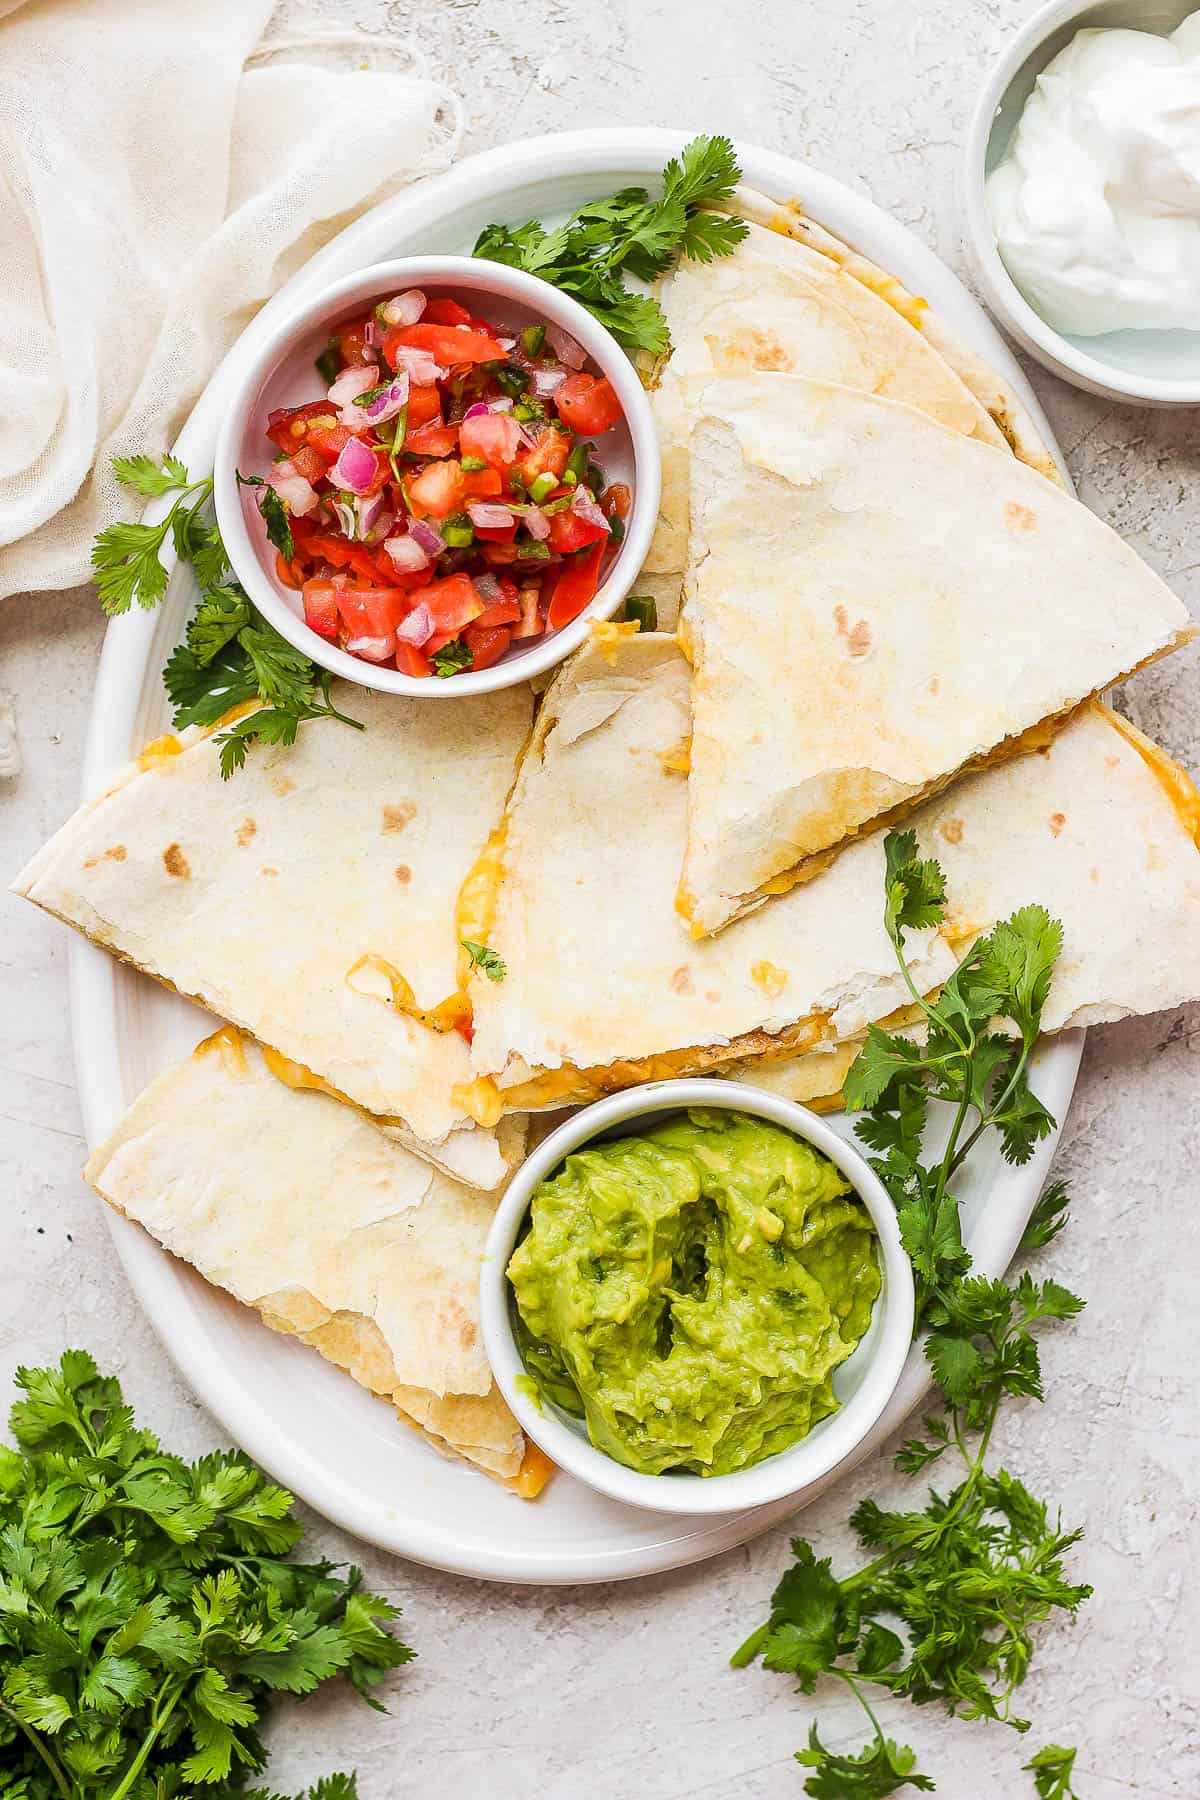 Chicken quesadillas on a platter served with a small side of guacamole and pico de gallo.